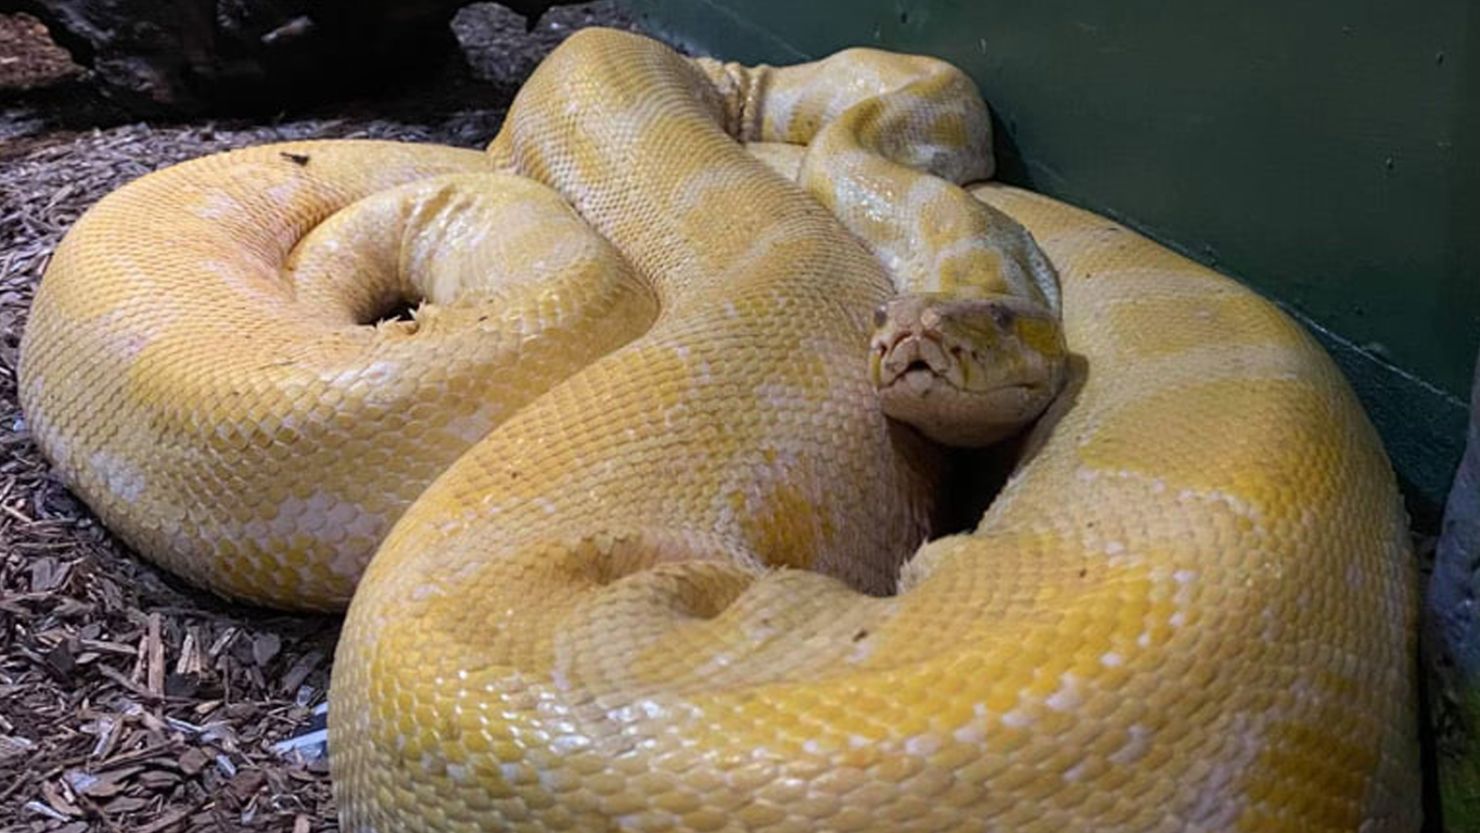 Cara, a large, banana-yellow Burmese python, slithered out of her exhibit in the Blue Zoo aquarium in the Mall of Louisiana.